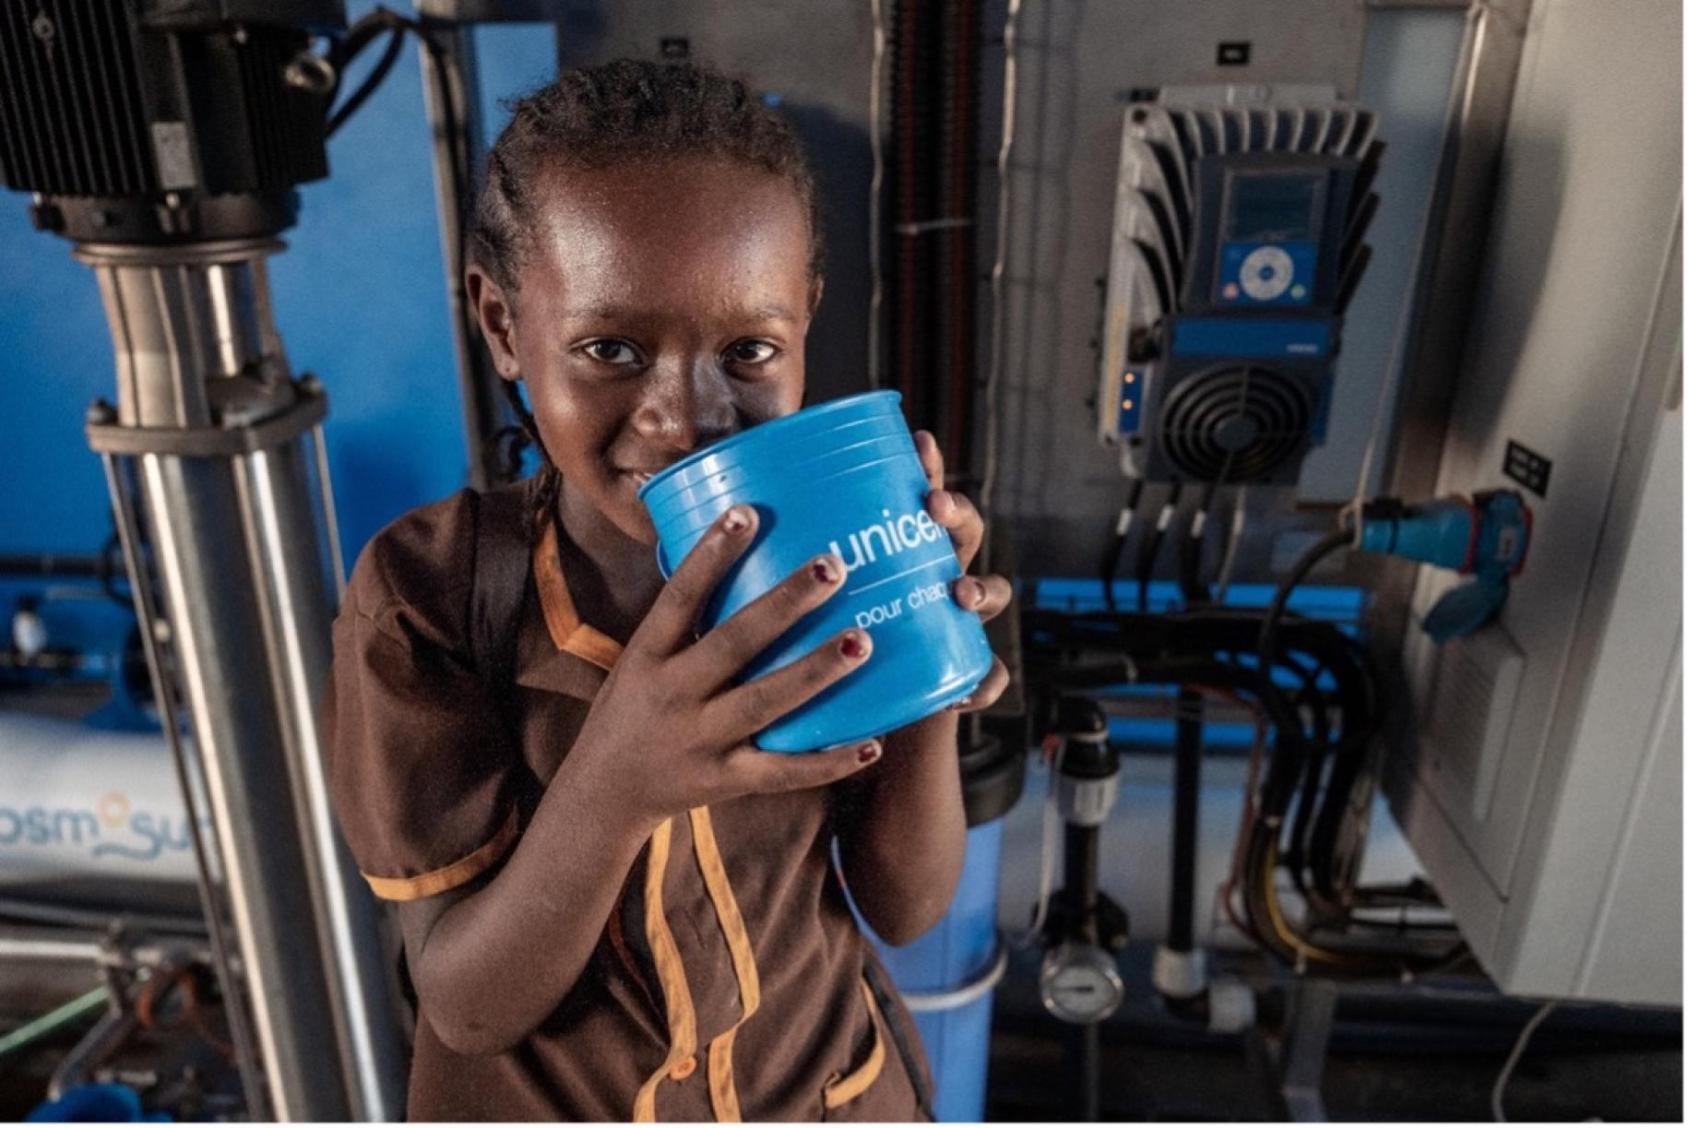 Child drinks water from a blue tumbler with a UNICEF logo in a room with a purification machine